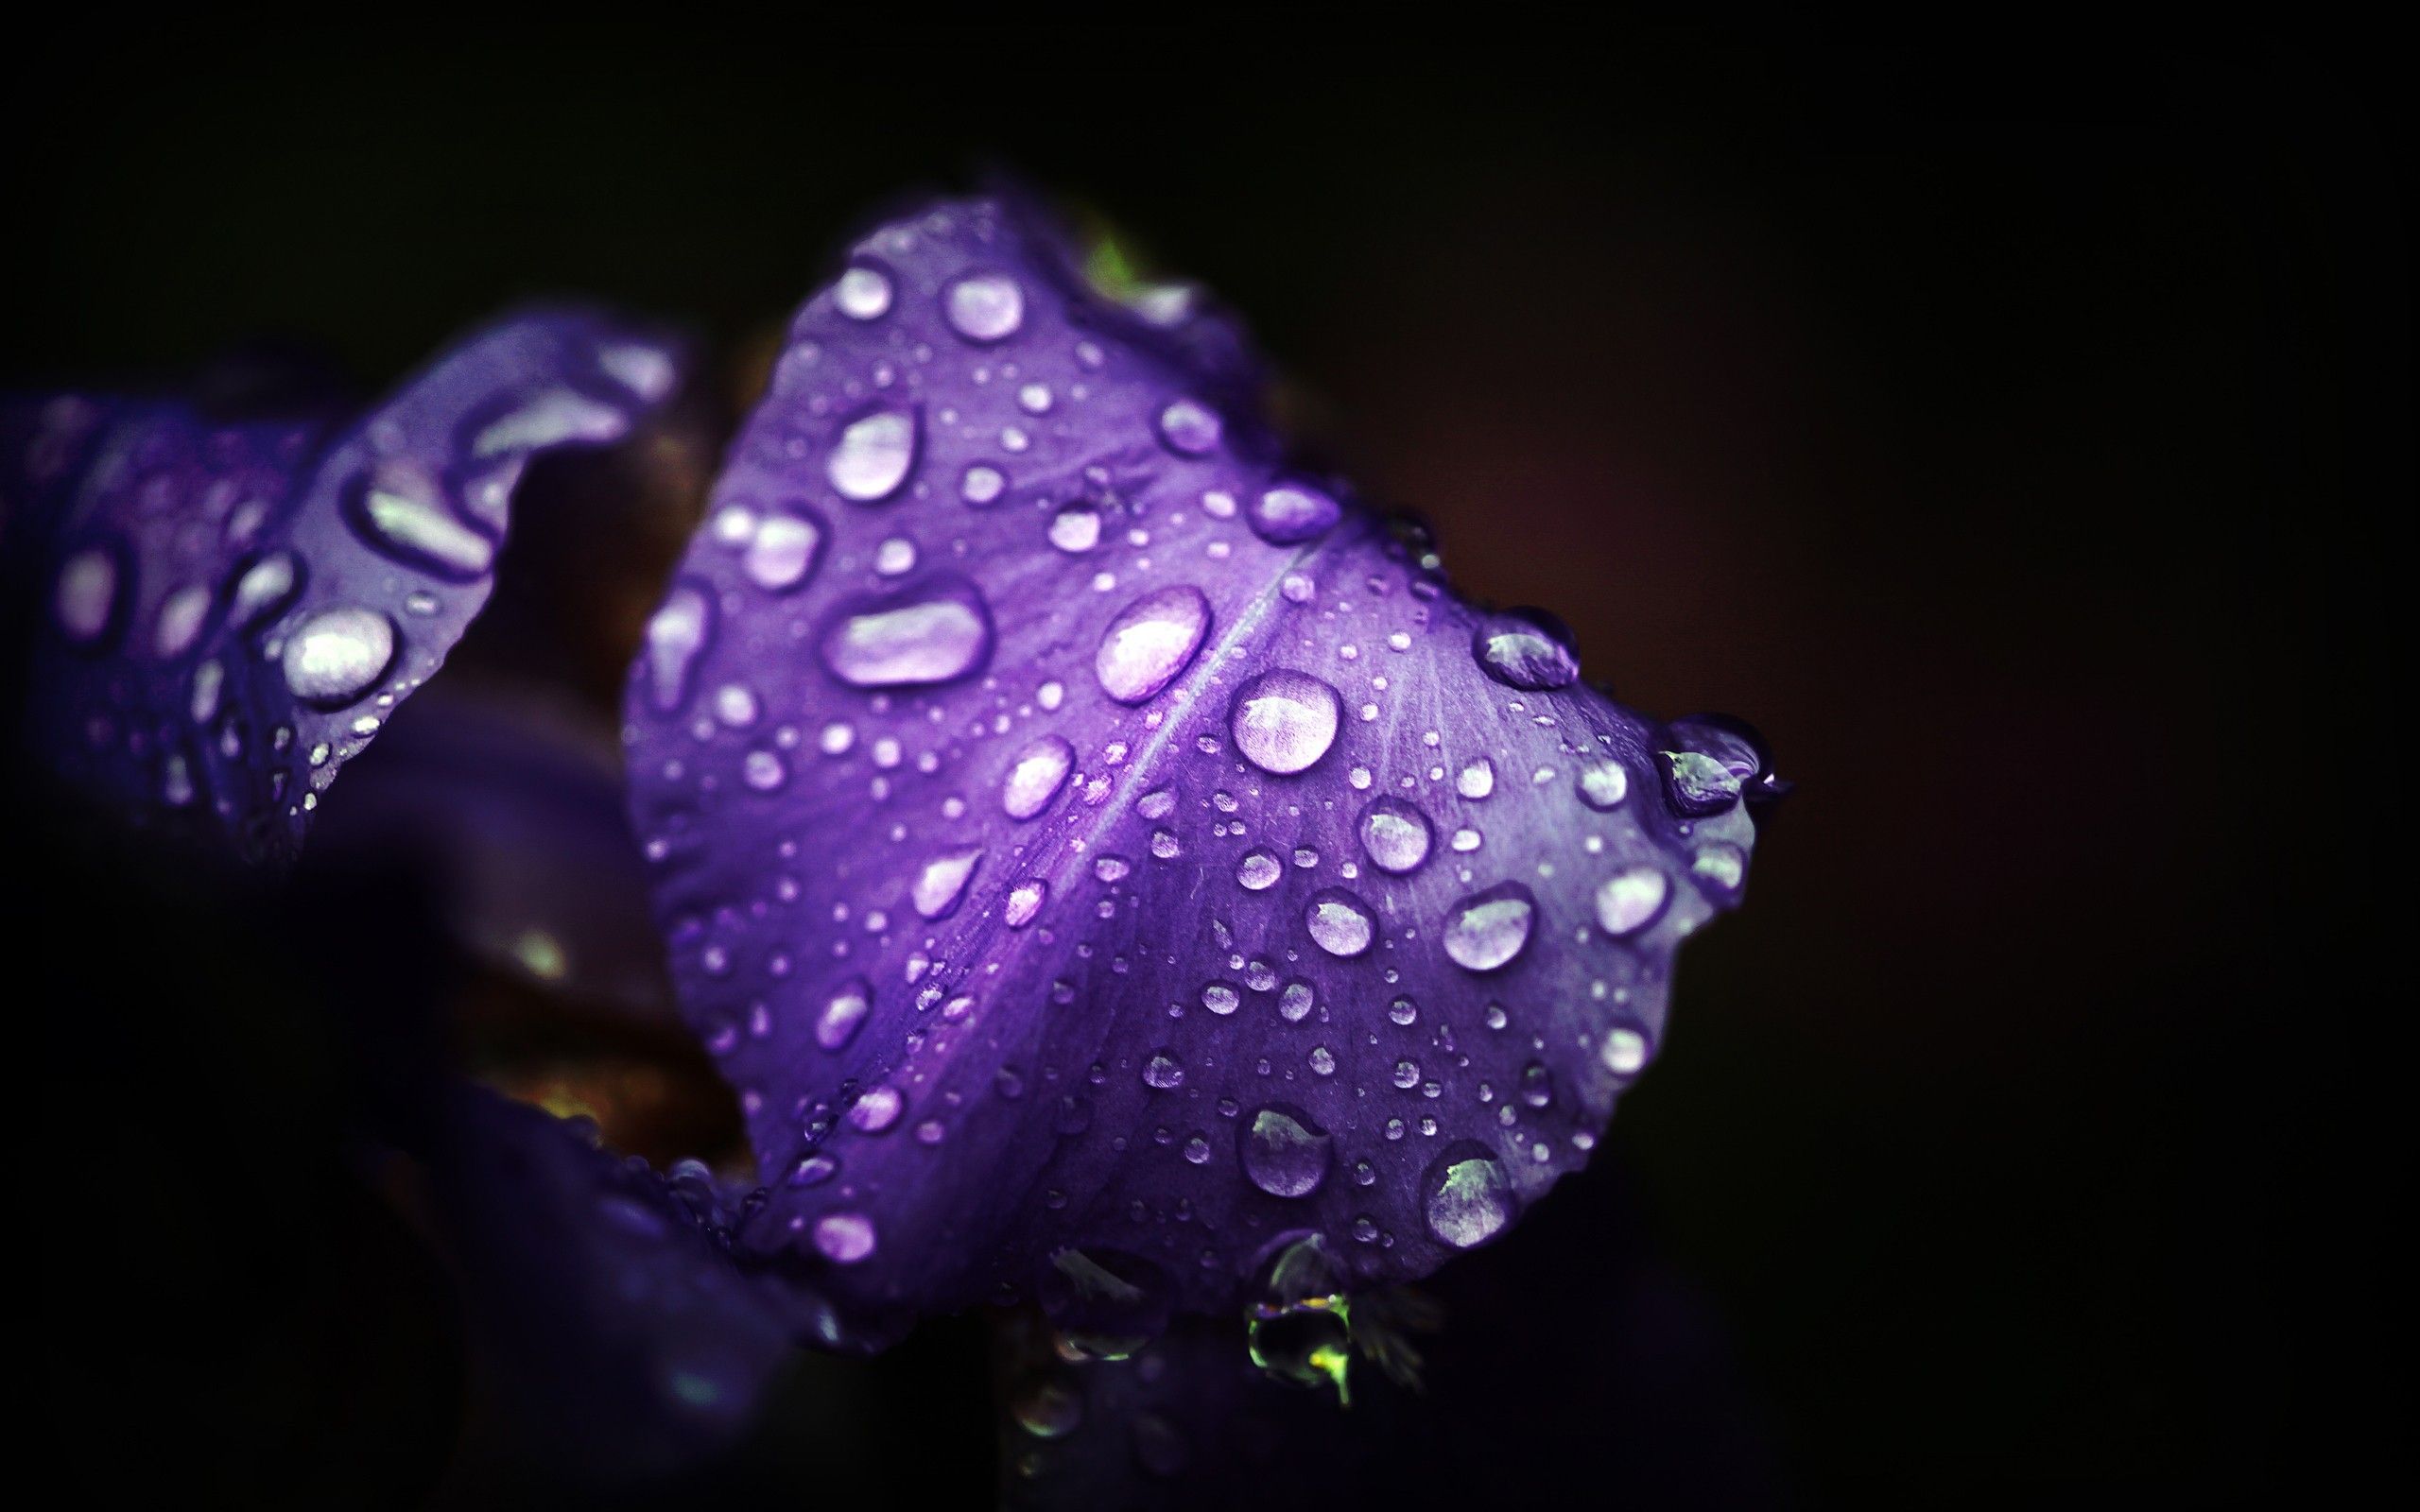 Wet purple petals on a black background wallpaper and image